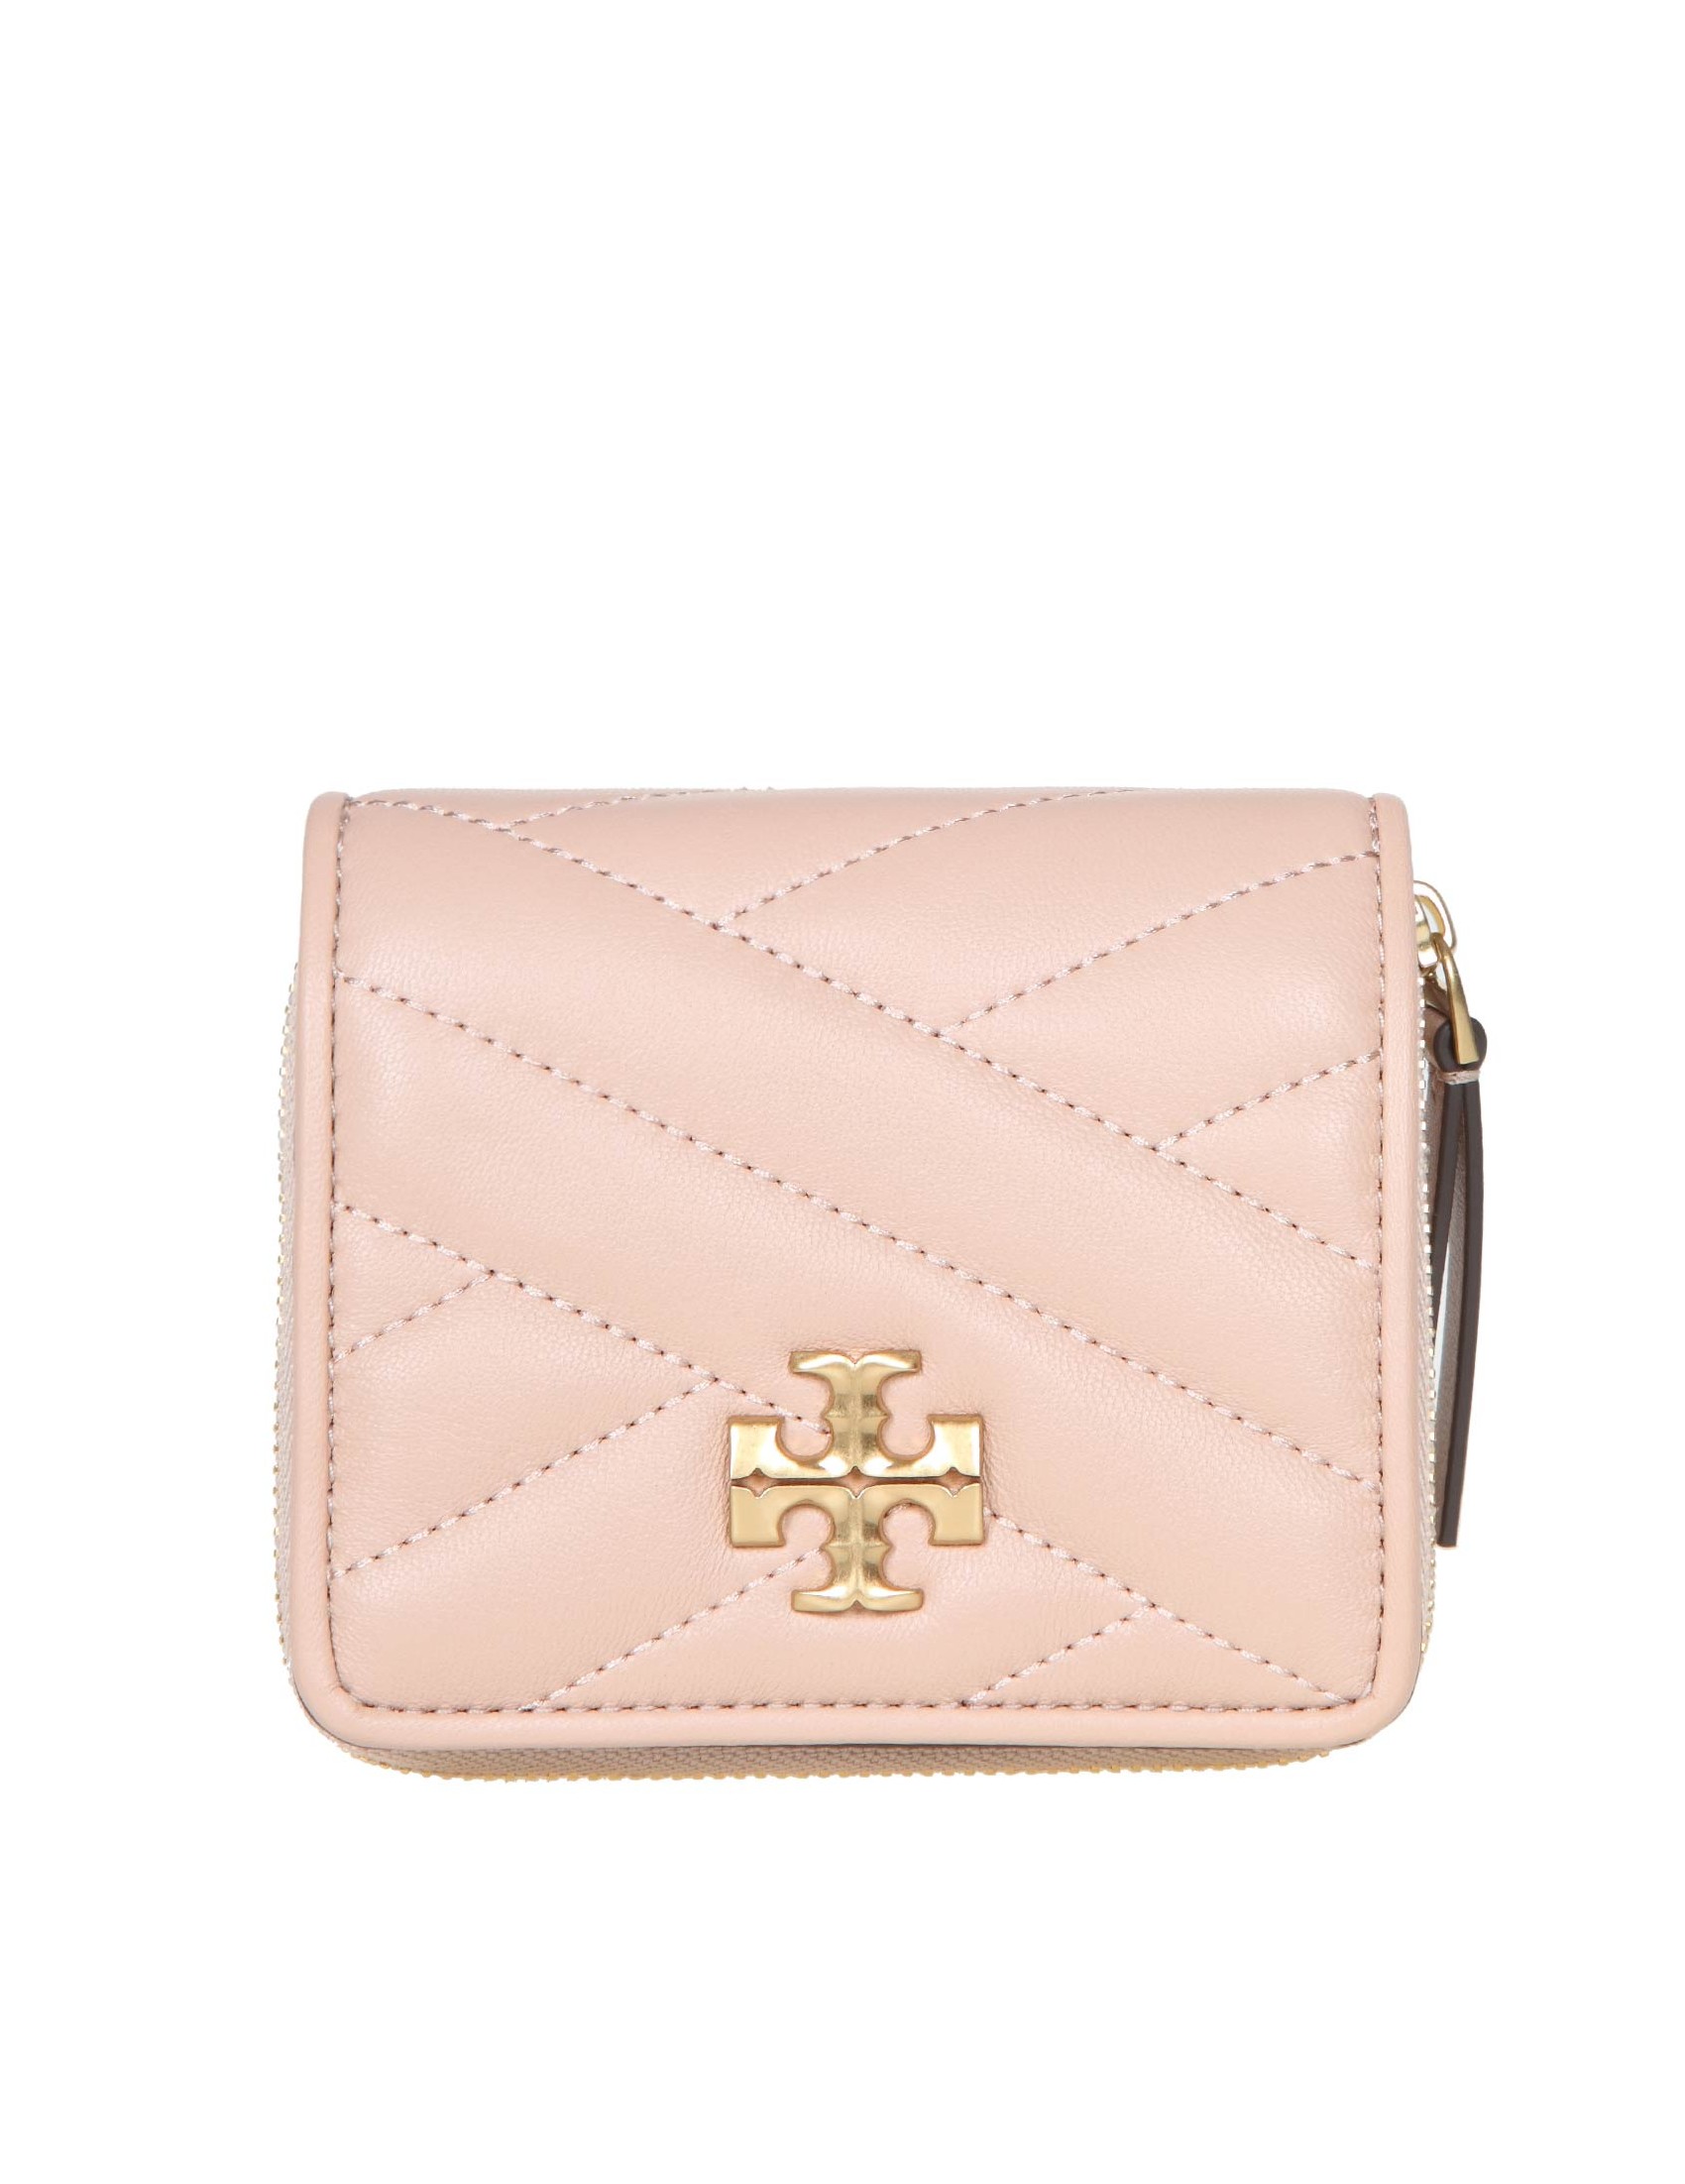 TORY BURCH KIRA CHEVRON WALLET IN SAND COLOR LEATHER